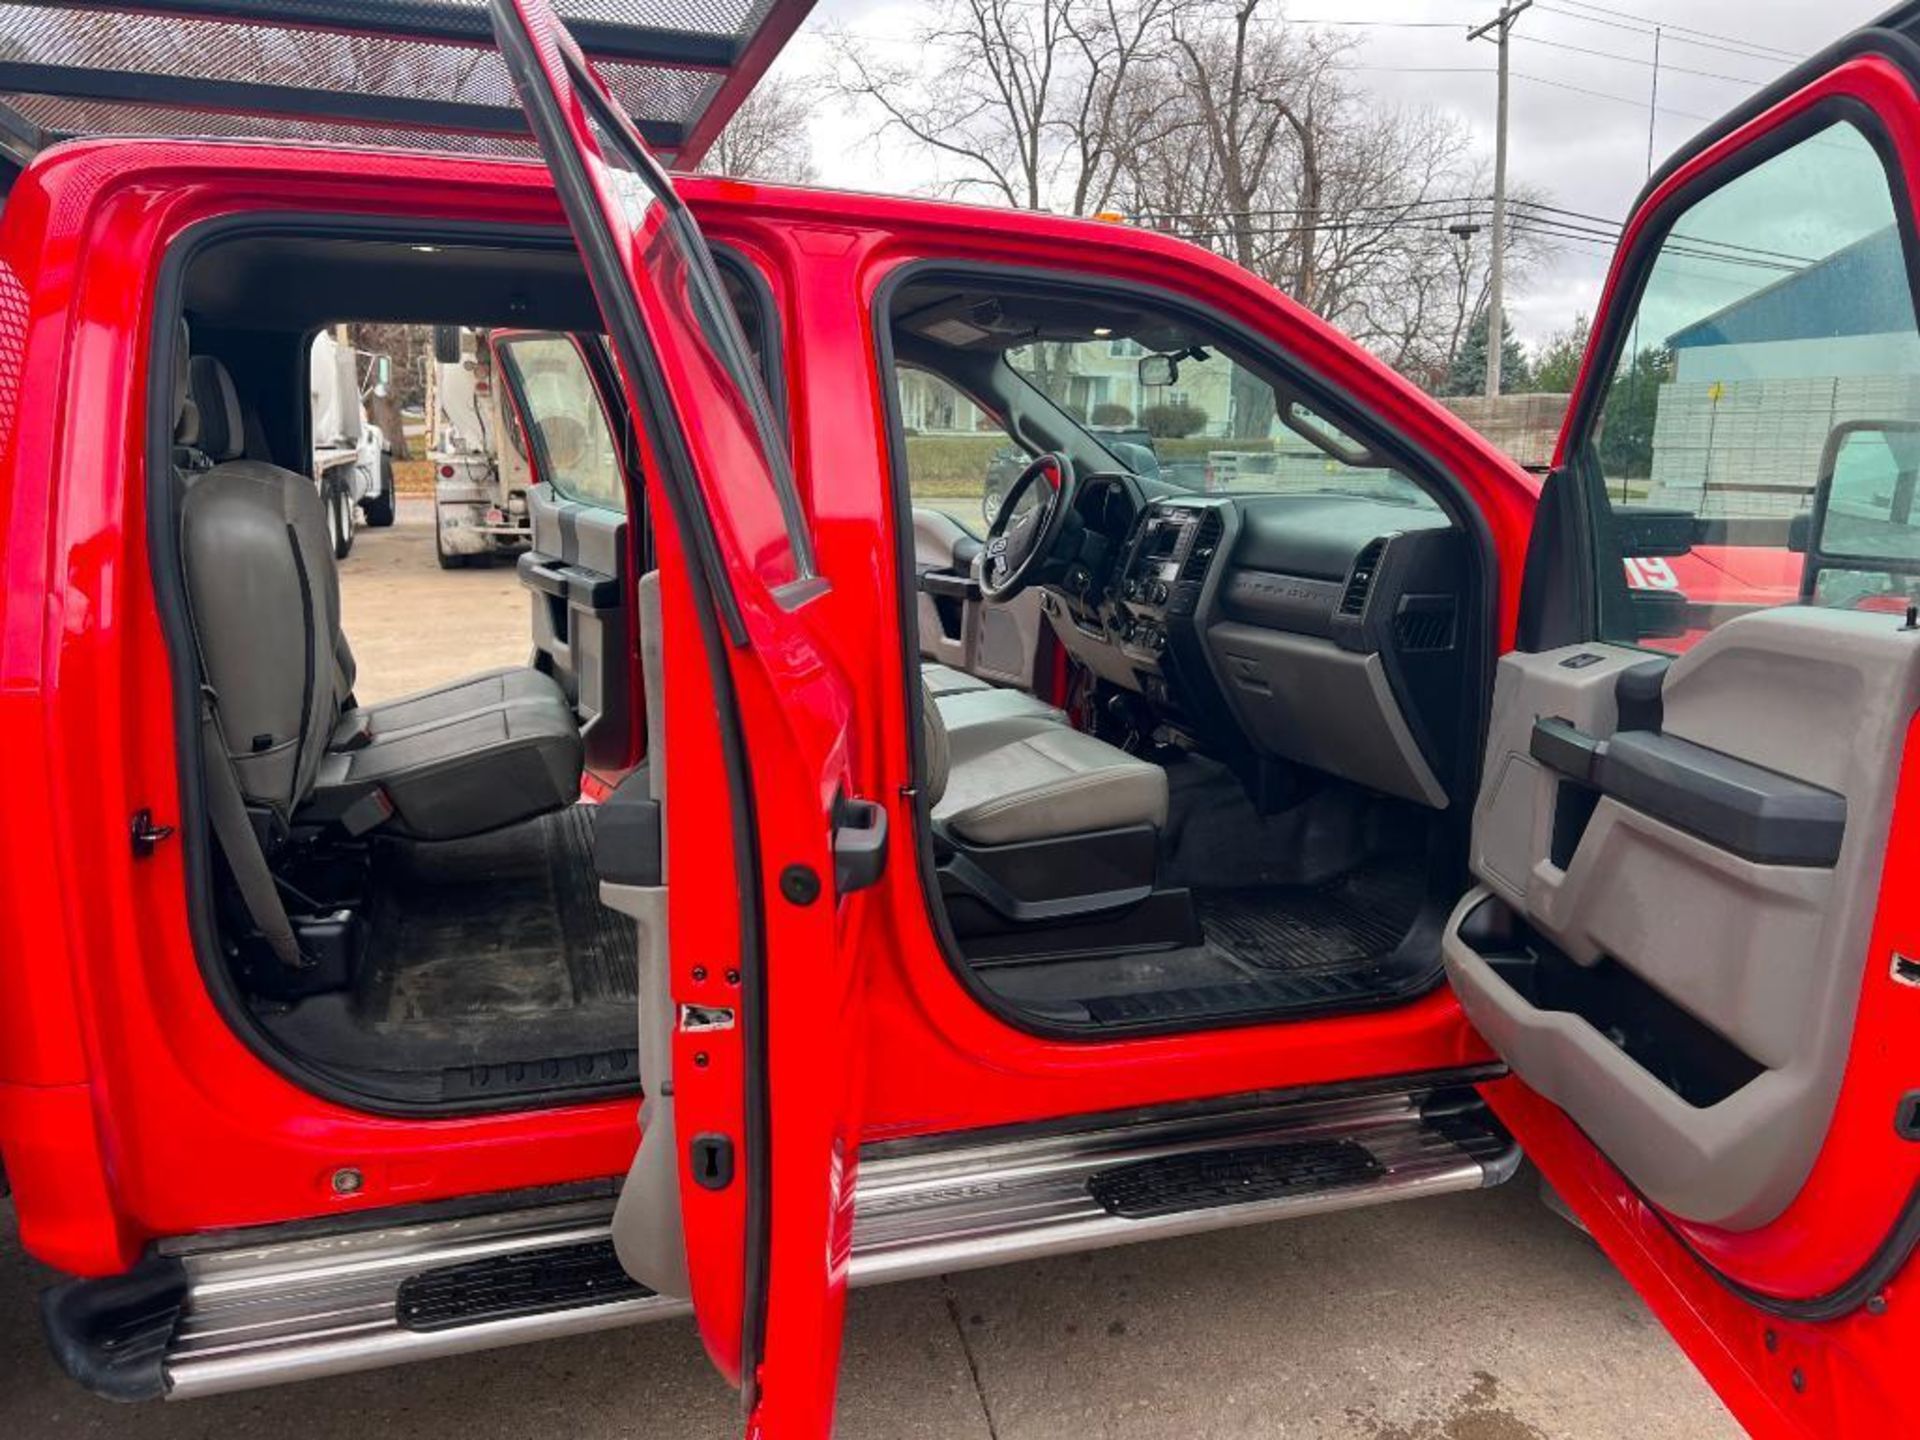 2019 Ford F550 4X4 Crew Cab Truck, VIN #1FD0W5HT1KEE51904, Miles 111,556, 6-Speed Automatic Transmis - Image 25 of 29